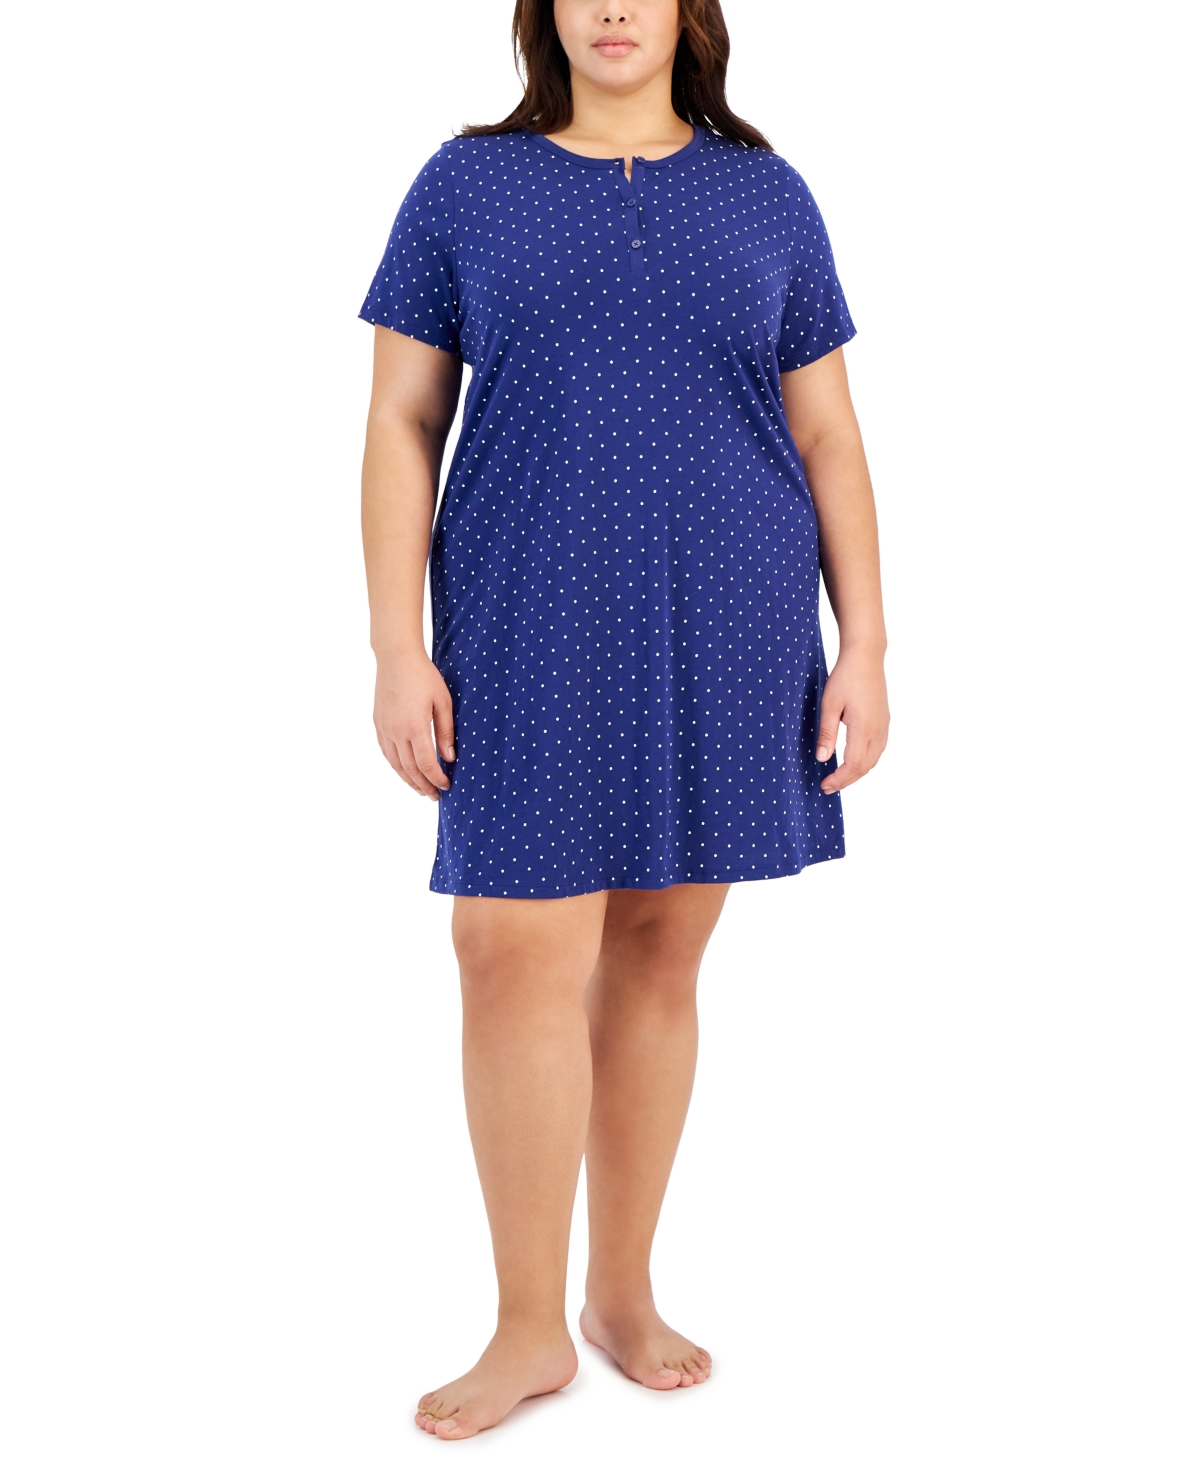 CHARTER CLUB PLUS SIZE COTTON PRINTED HENLEY SLEEPSHIRT, CREATED FOR MACY'S